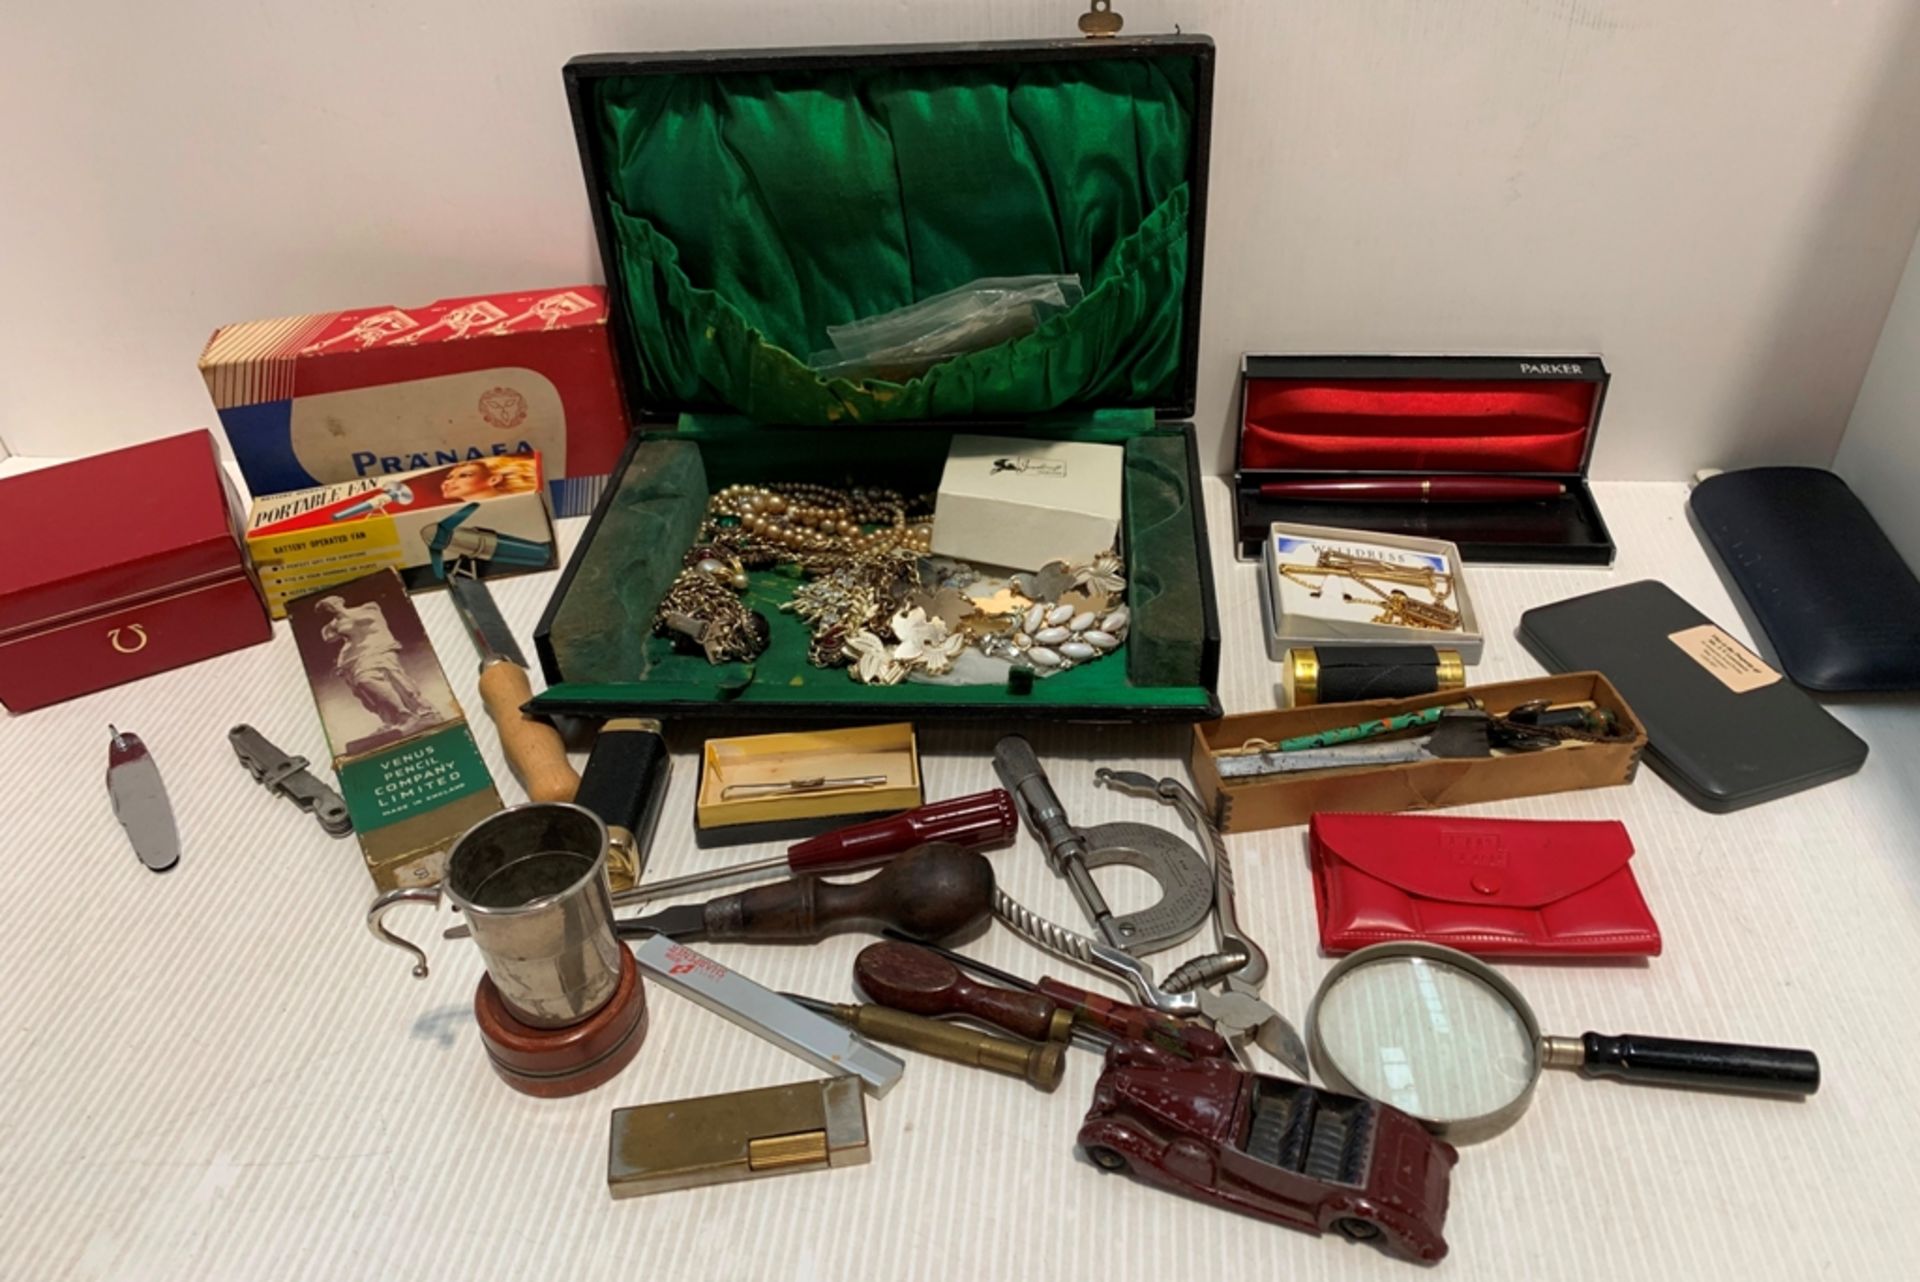 Contents to box - folding cup, costume jewellery, hair clippers, small tools etc.